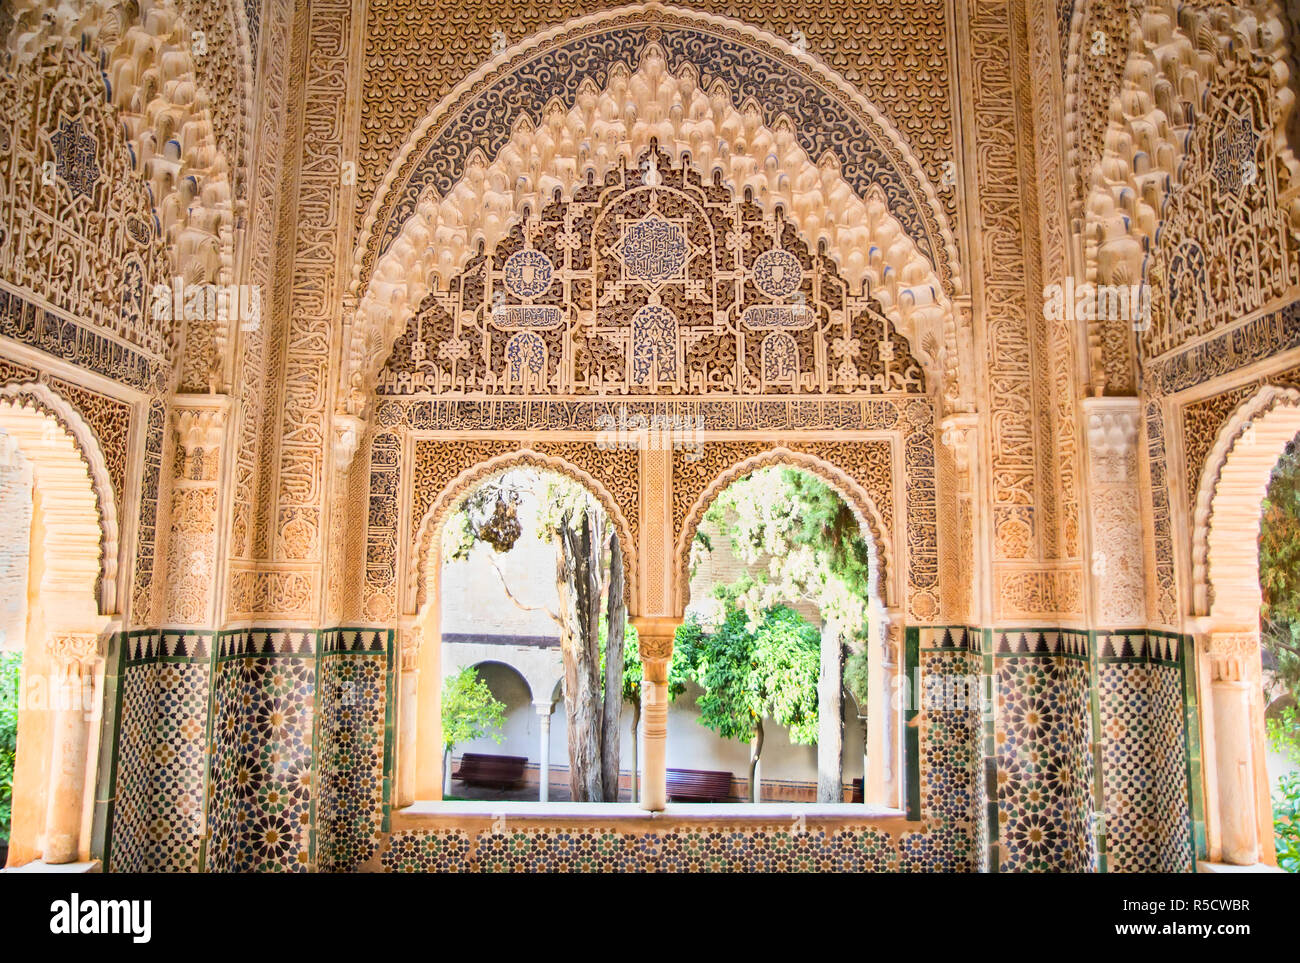 Moorish architecture in the Nasrid Palaces of the Alhambra of Granada in Spain, with beautiful intricate carvings and windows ovrlooking a garden. Stock Photo